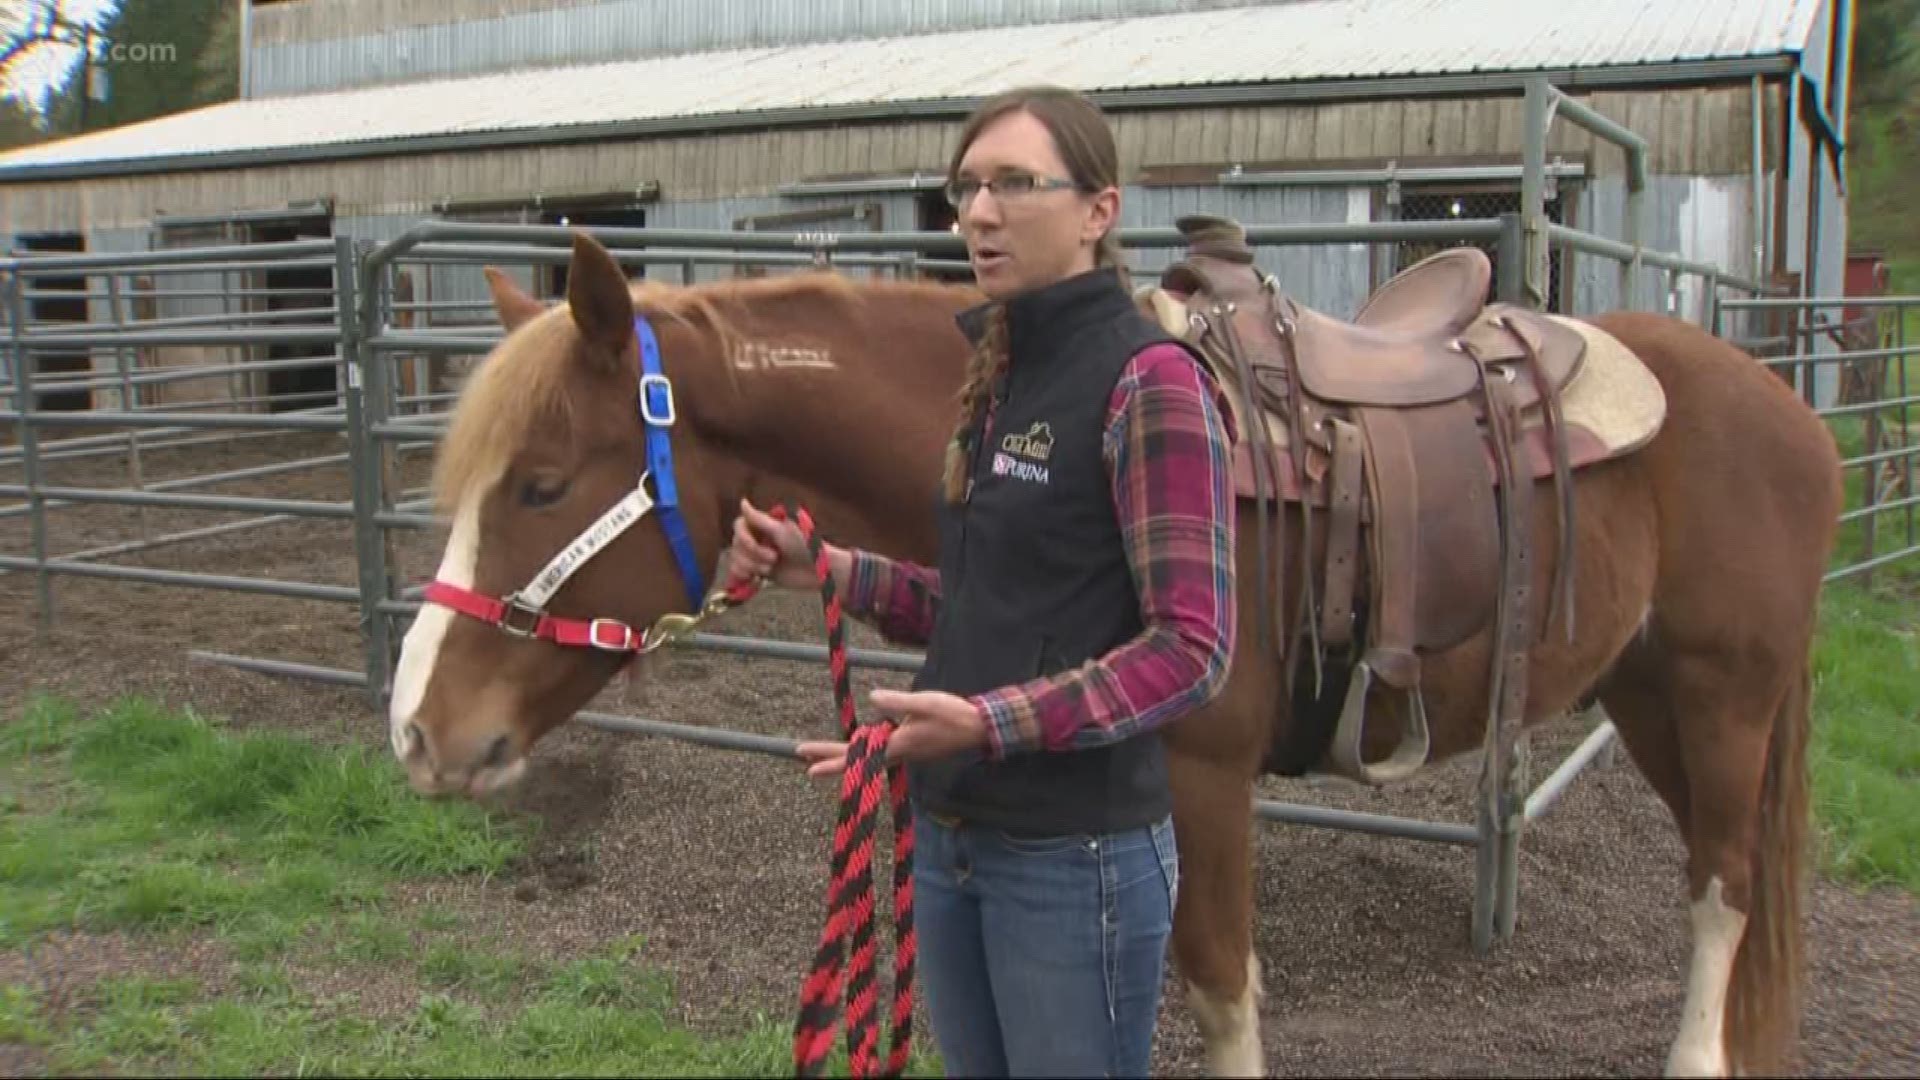 An Oregon horse trainer is working with wild mustangs to help save them from possible starvation or even slaughter, one horse at a time.